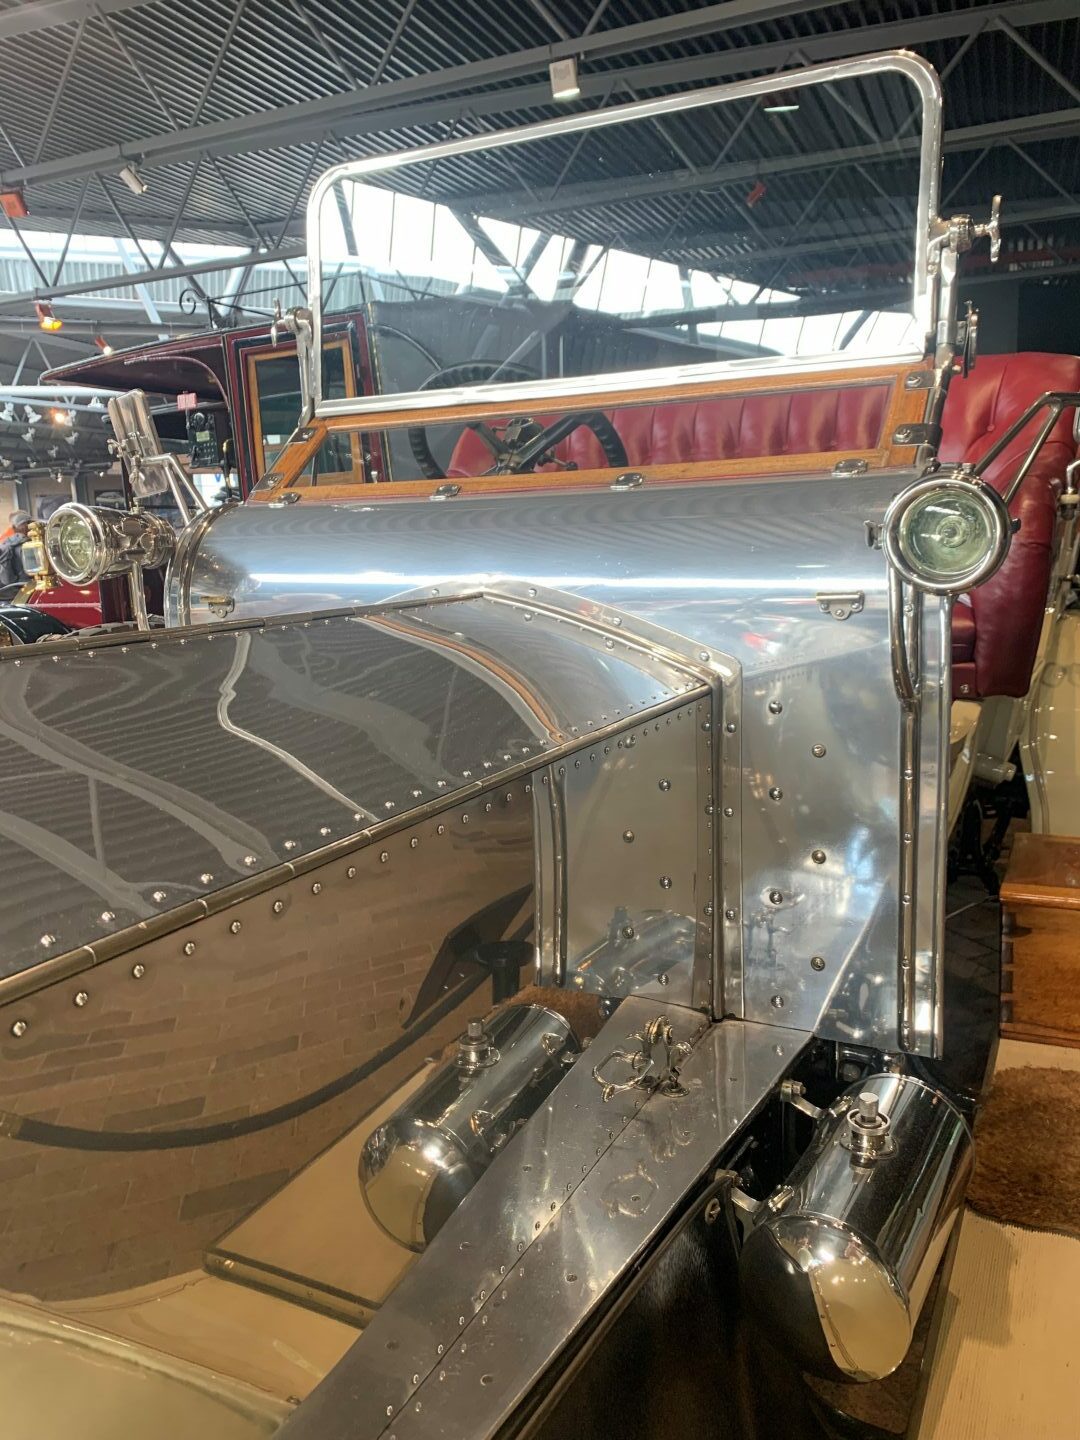 The gleaming silver bodywork of the 1909 Rolls-Royce Silver Ghost at the National Motor Museum in Beaulieu. Image: Kirstie Waterston/DC Thomson.